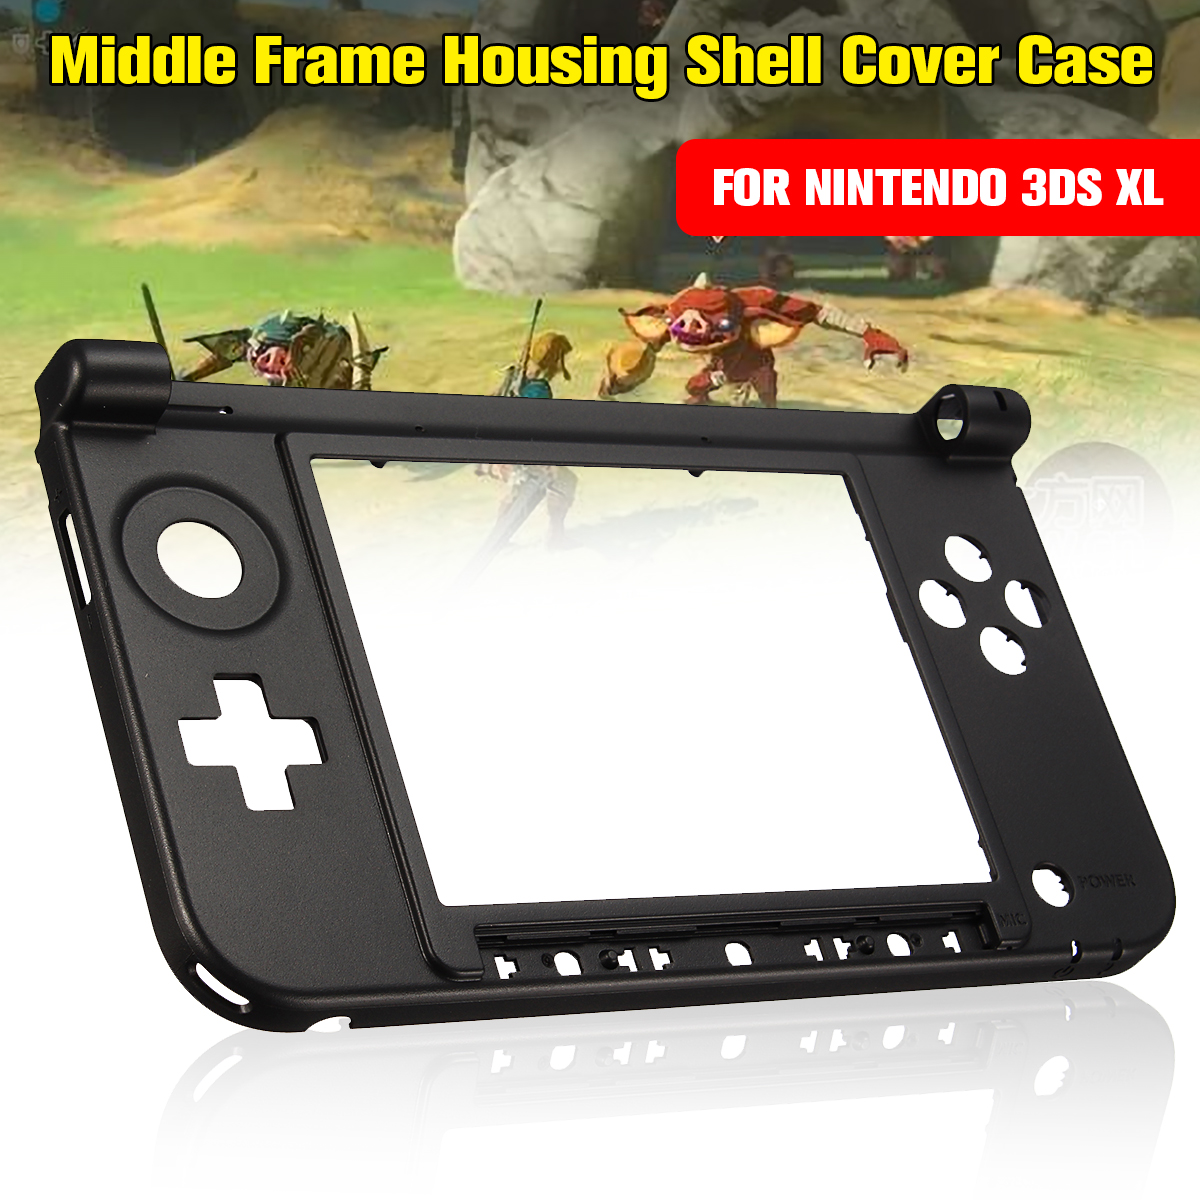 Replacement Bottom Middle Frame Housing Shell Cover Case for Nintendo 3DS XL 3DS LL Game Console 29